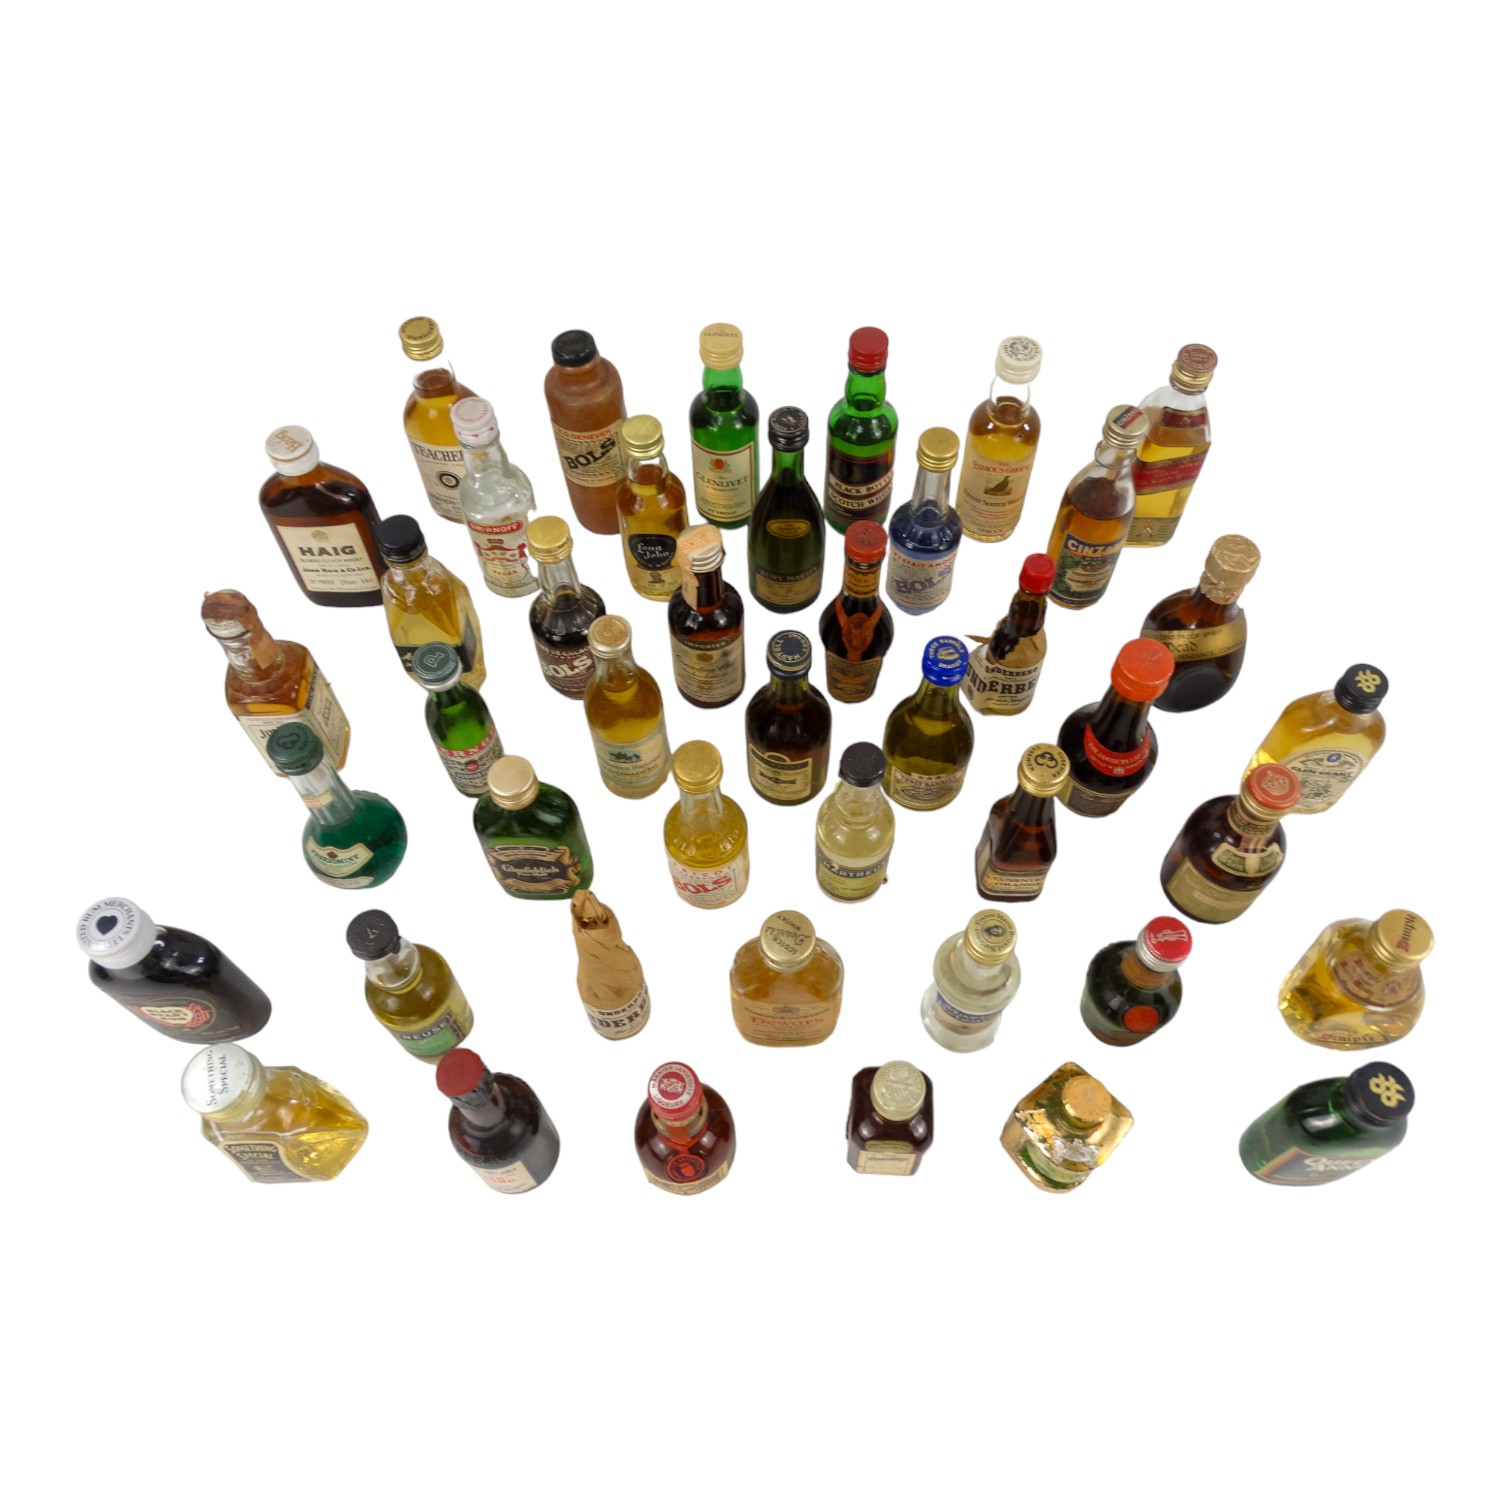 Forty-four miniature bottles of spirits - including some liqueurs. - Image 3 of 7